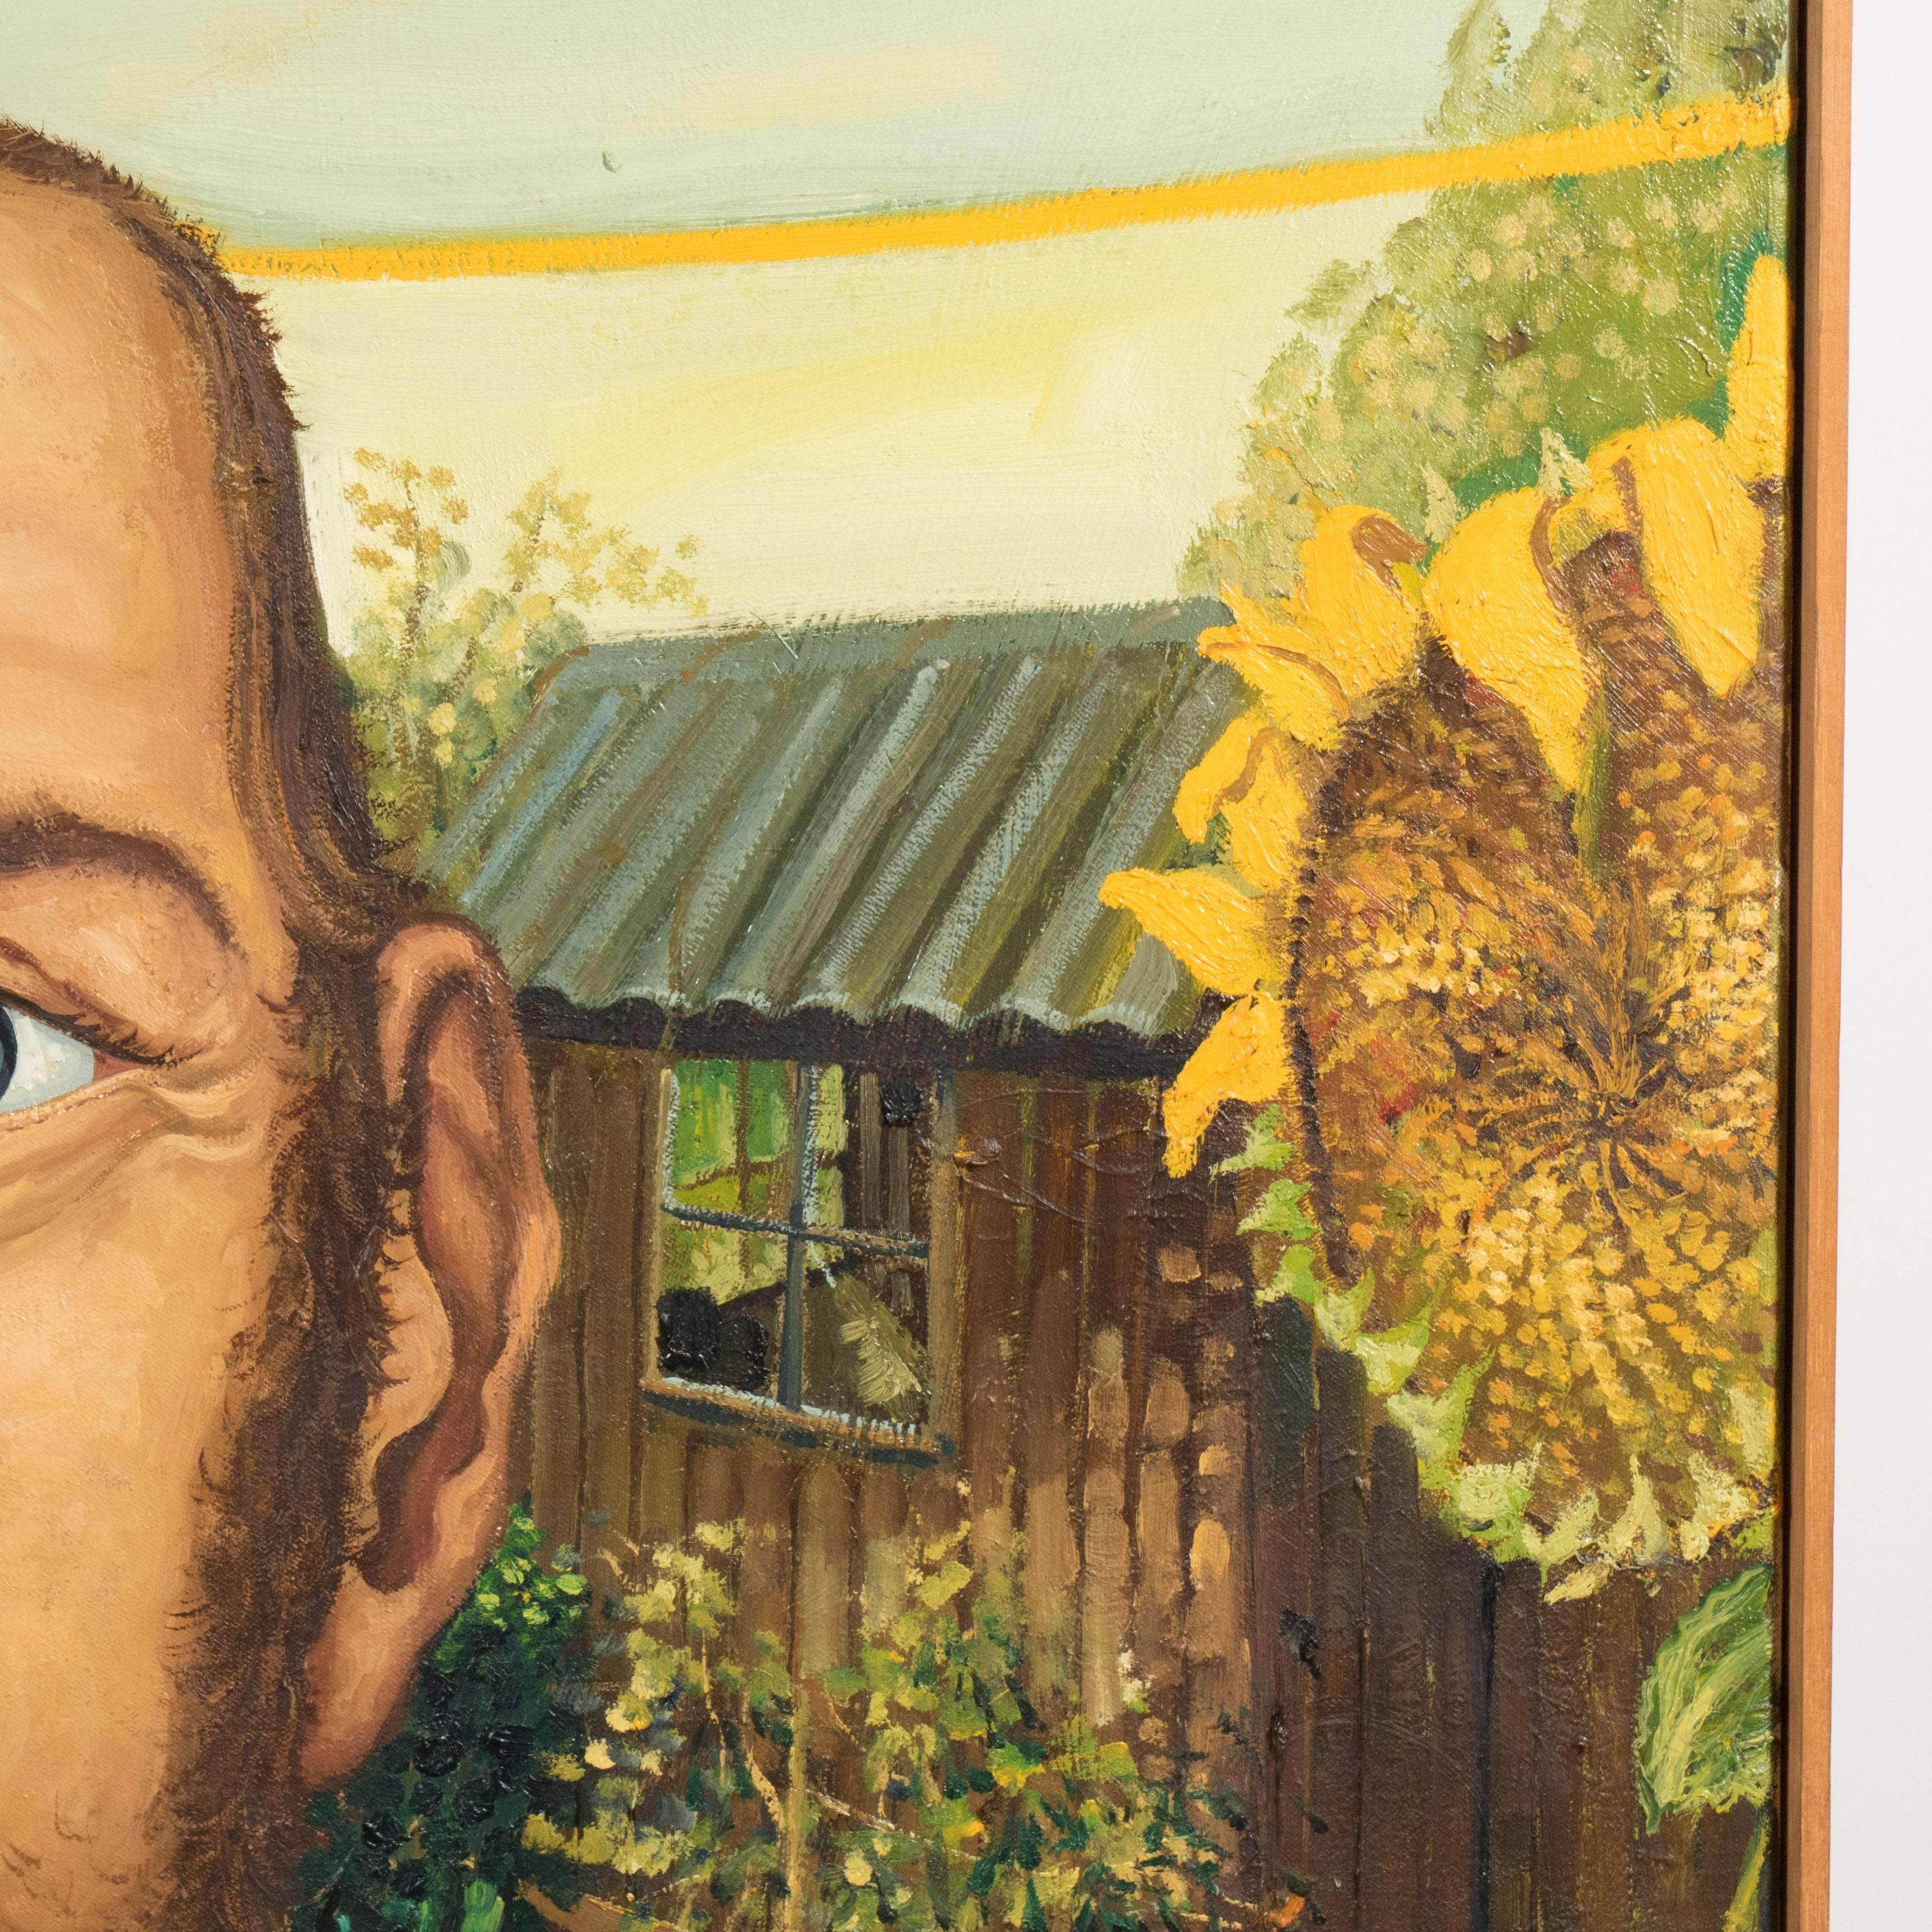 The Sun Flower Portrait English Anthony Green, Oil on Canvas, Realized in 1974 1